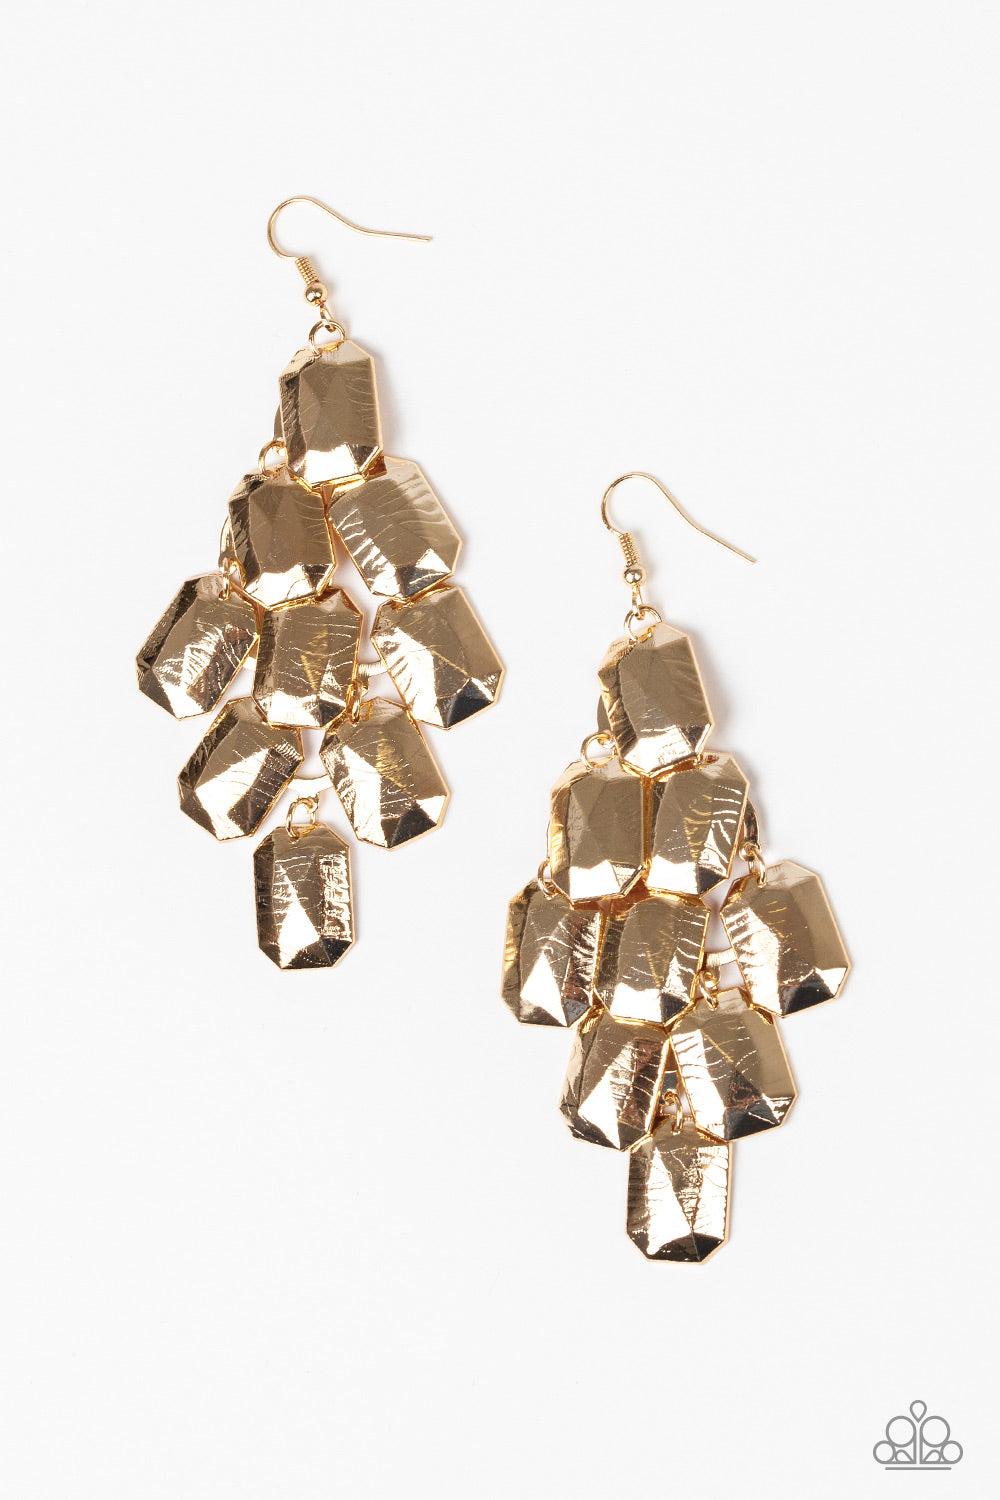 Contemporary Catwalk - Gold earrings